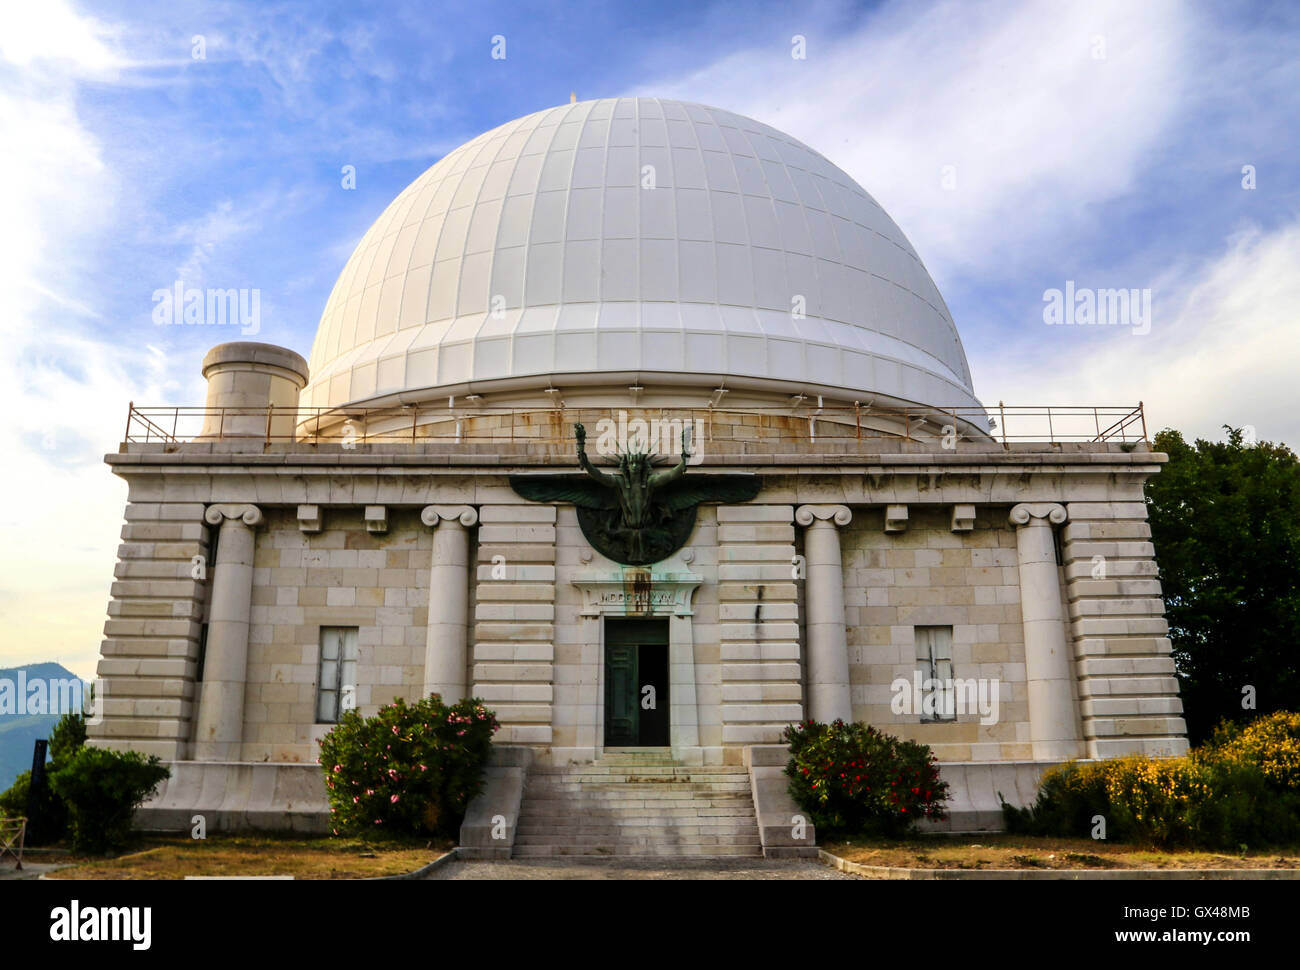 Old Observatory dome in Nice, French Riviera, France Stock Photo